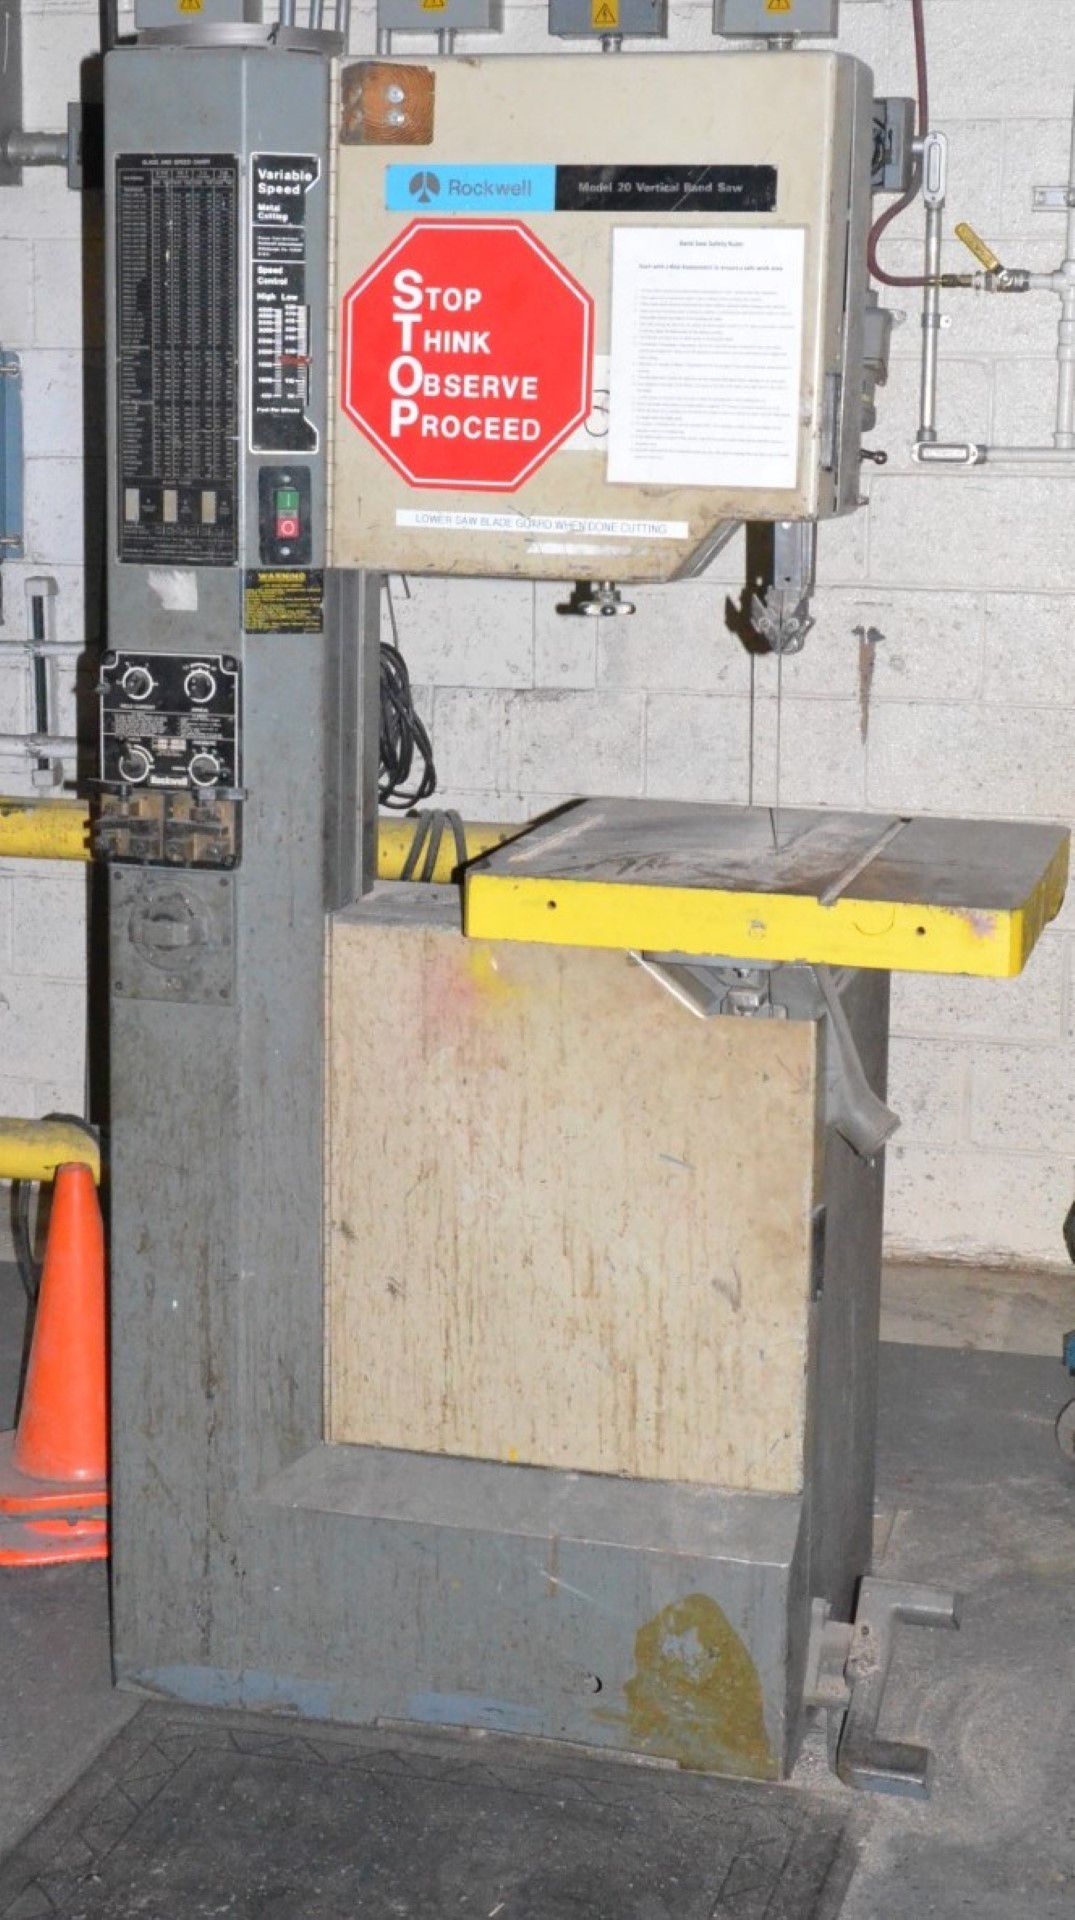 ROCKWELL MODEL 20 VERTICAL BAND SAW WITH 20" THROAT, 12" MAX WORKPIECE HEIGHT, 20"X24.5" MANUAL TILT